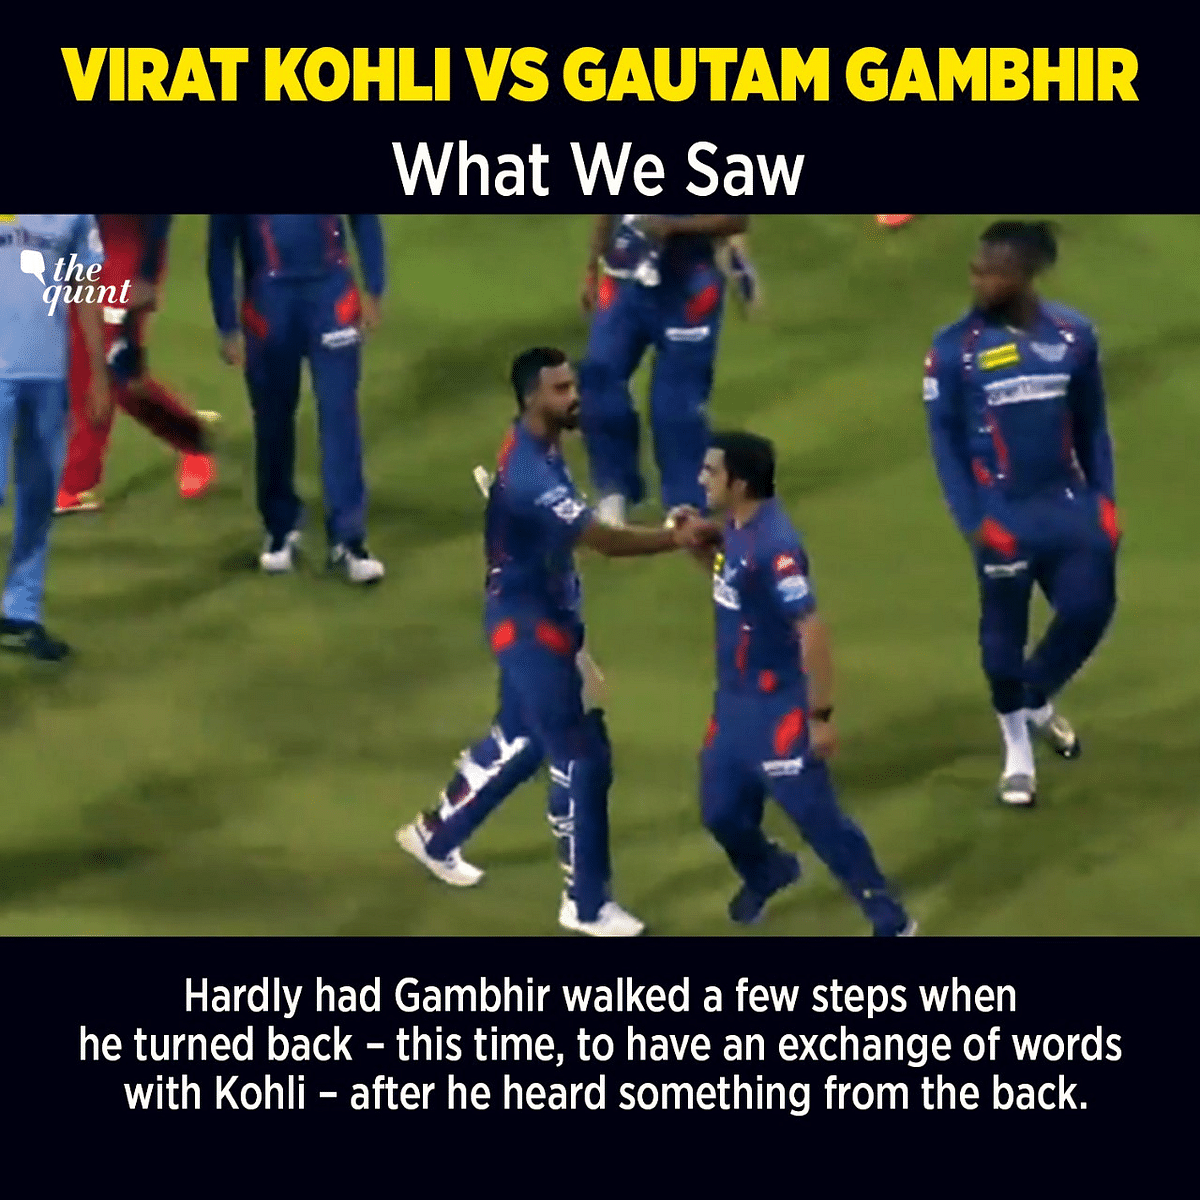 IPL 2023: Virat Kohli and Gautam Gambhir had yet another altercation on 1 May. Here's what transpired at Lucknow.